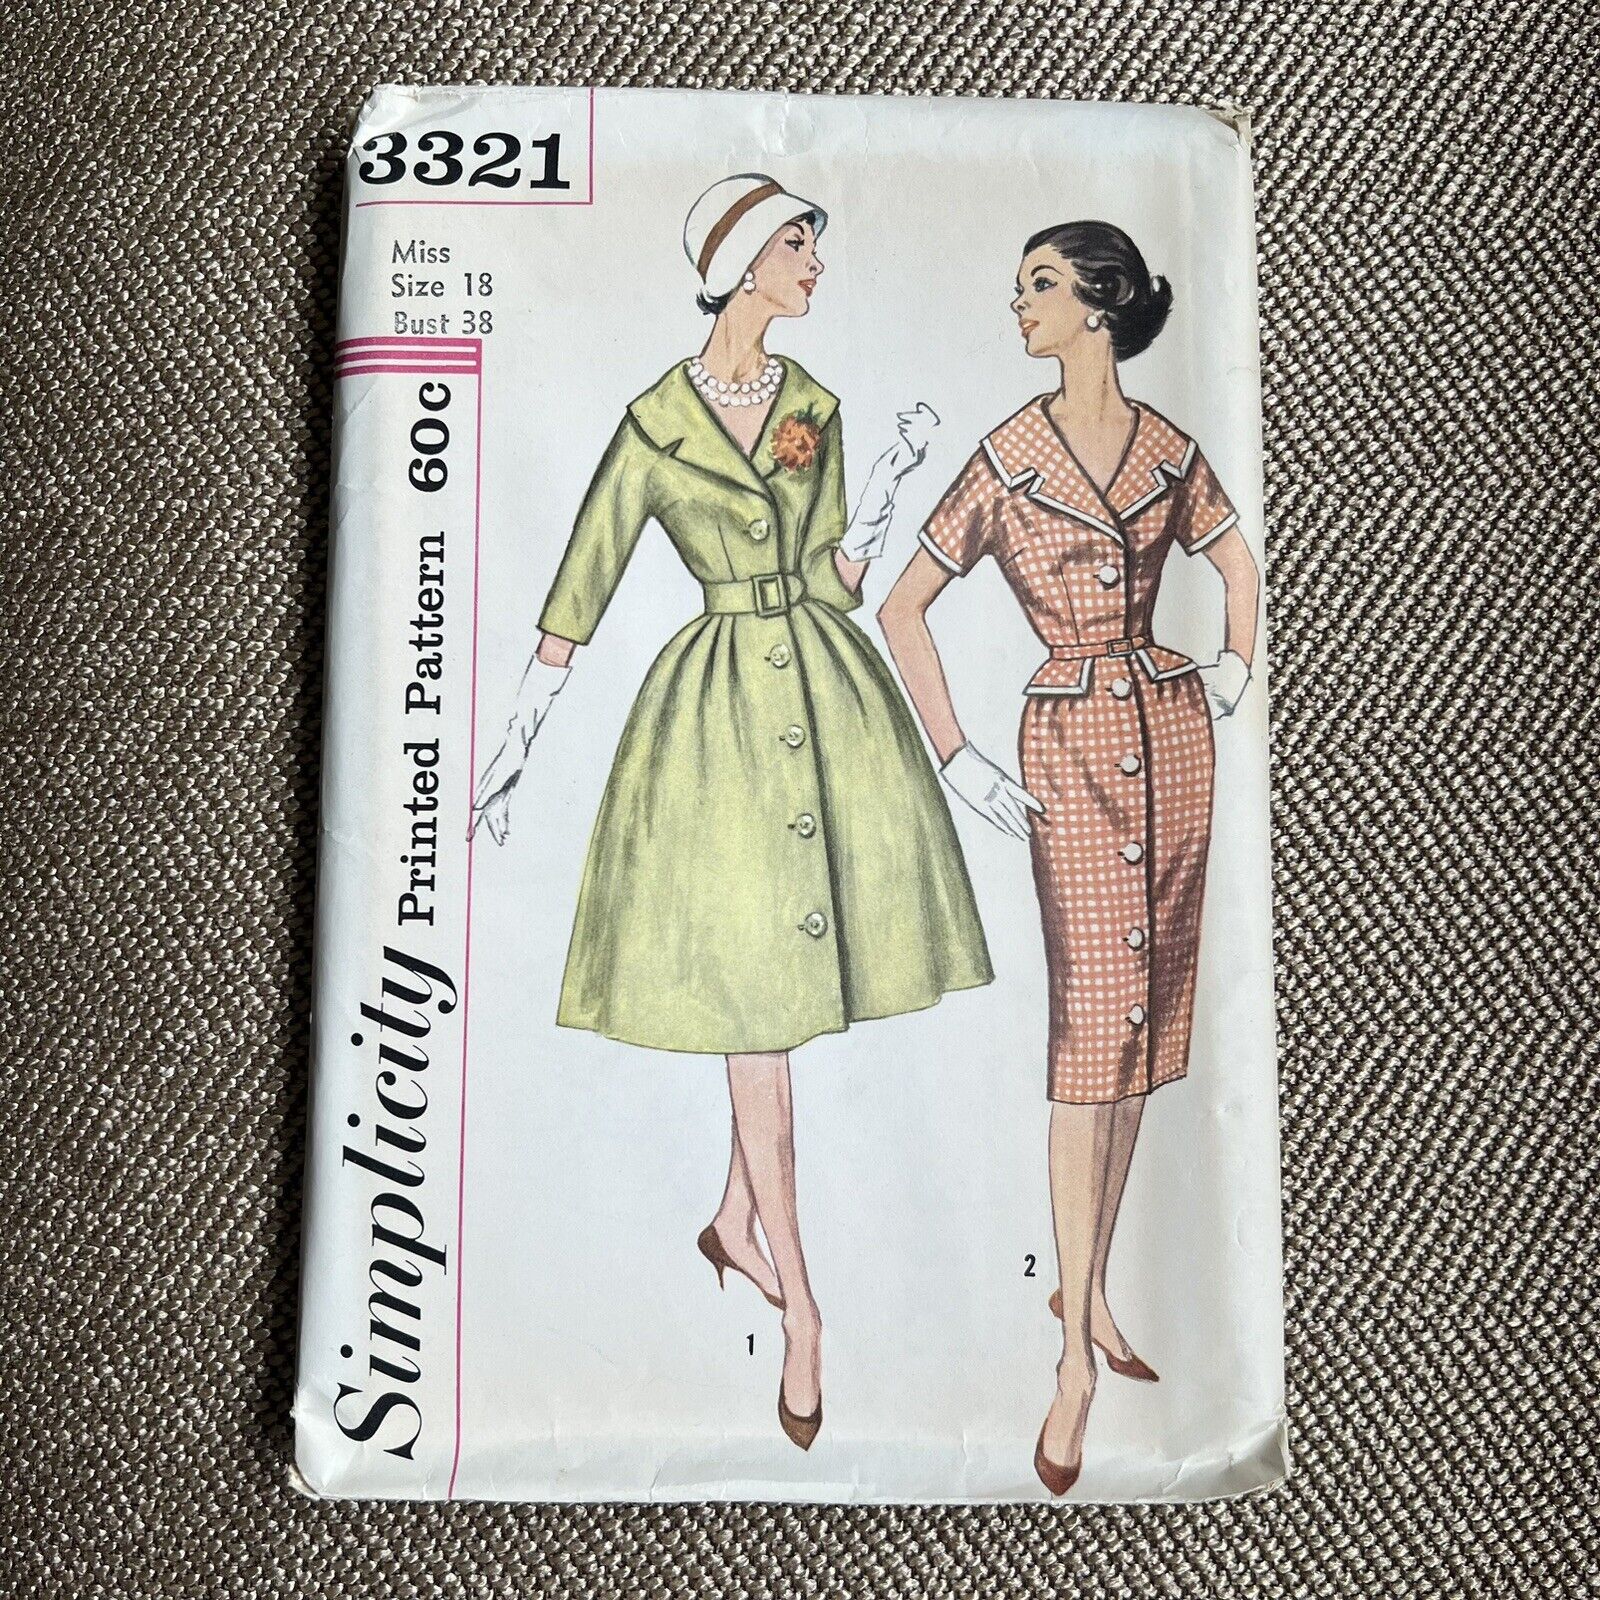 1950s Vintage Simplicity 3321 Fit And Flare Dress Sewing Pattern Size 18 UNCUT